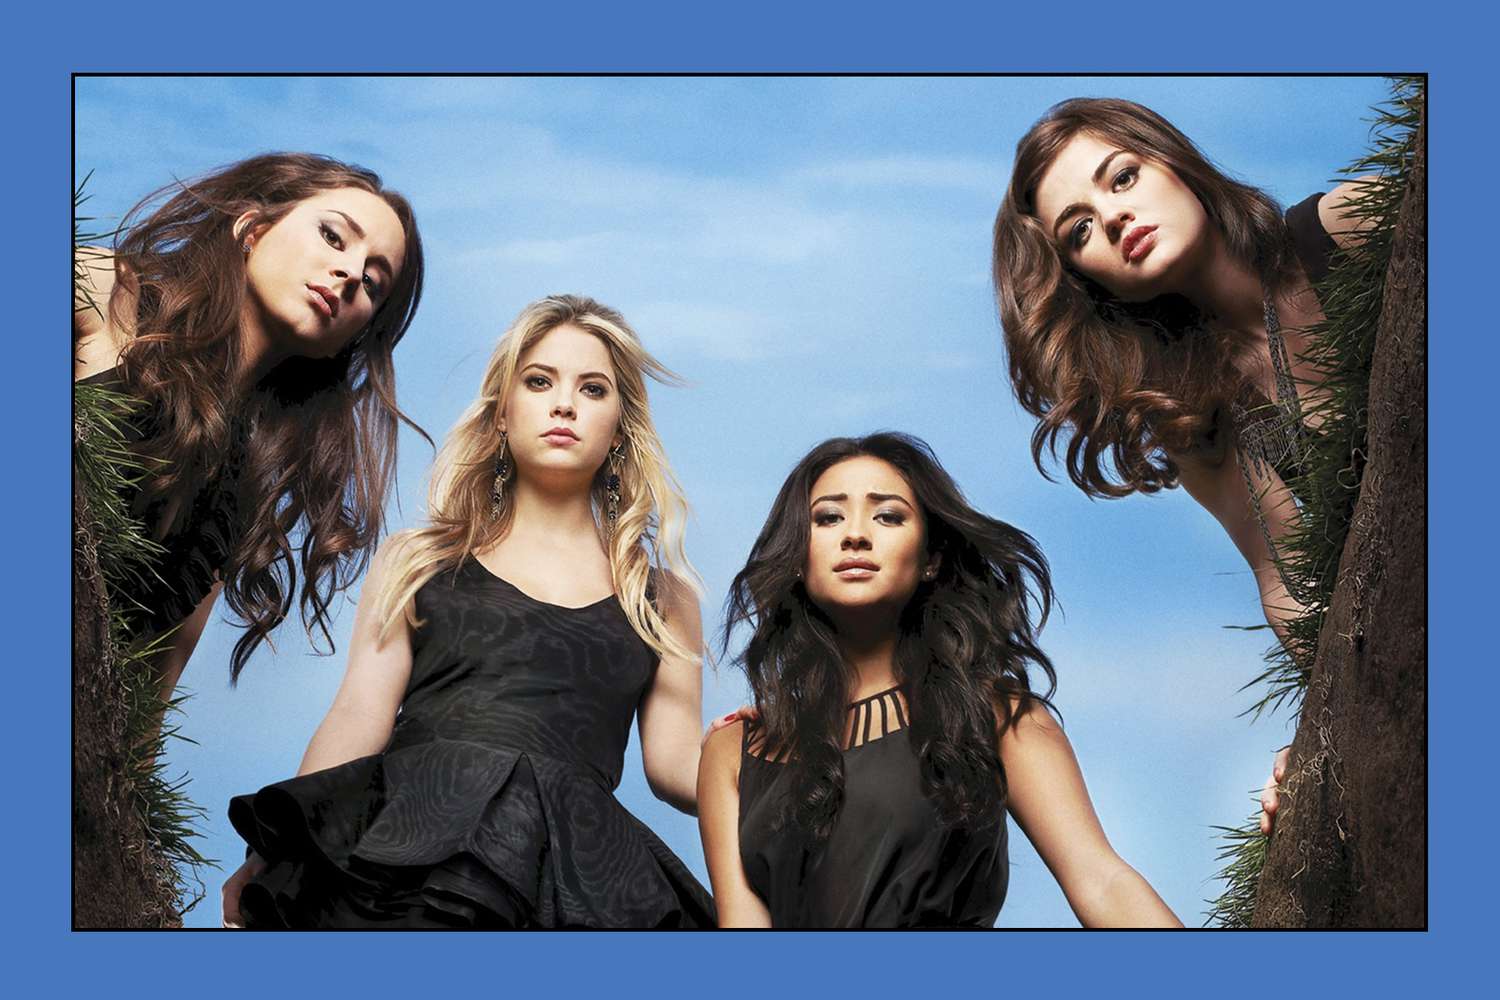 'Pretty Little Liars' cast: Here's where Shay Mitchell, Lucy Hale, and the other liars are now